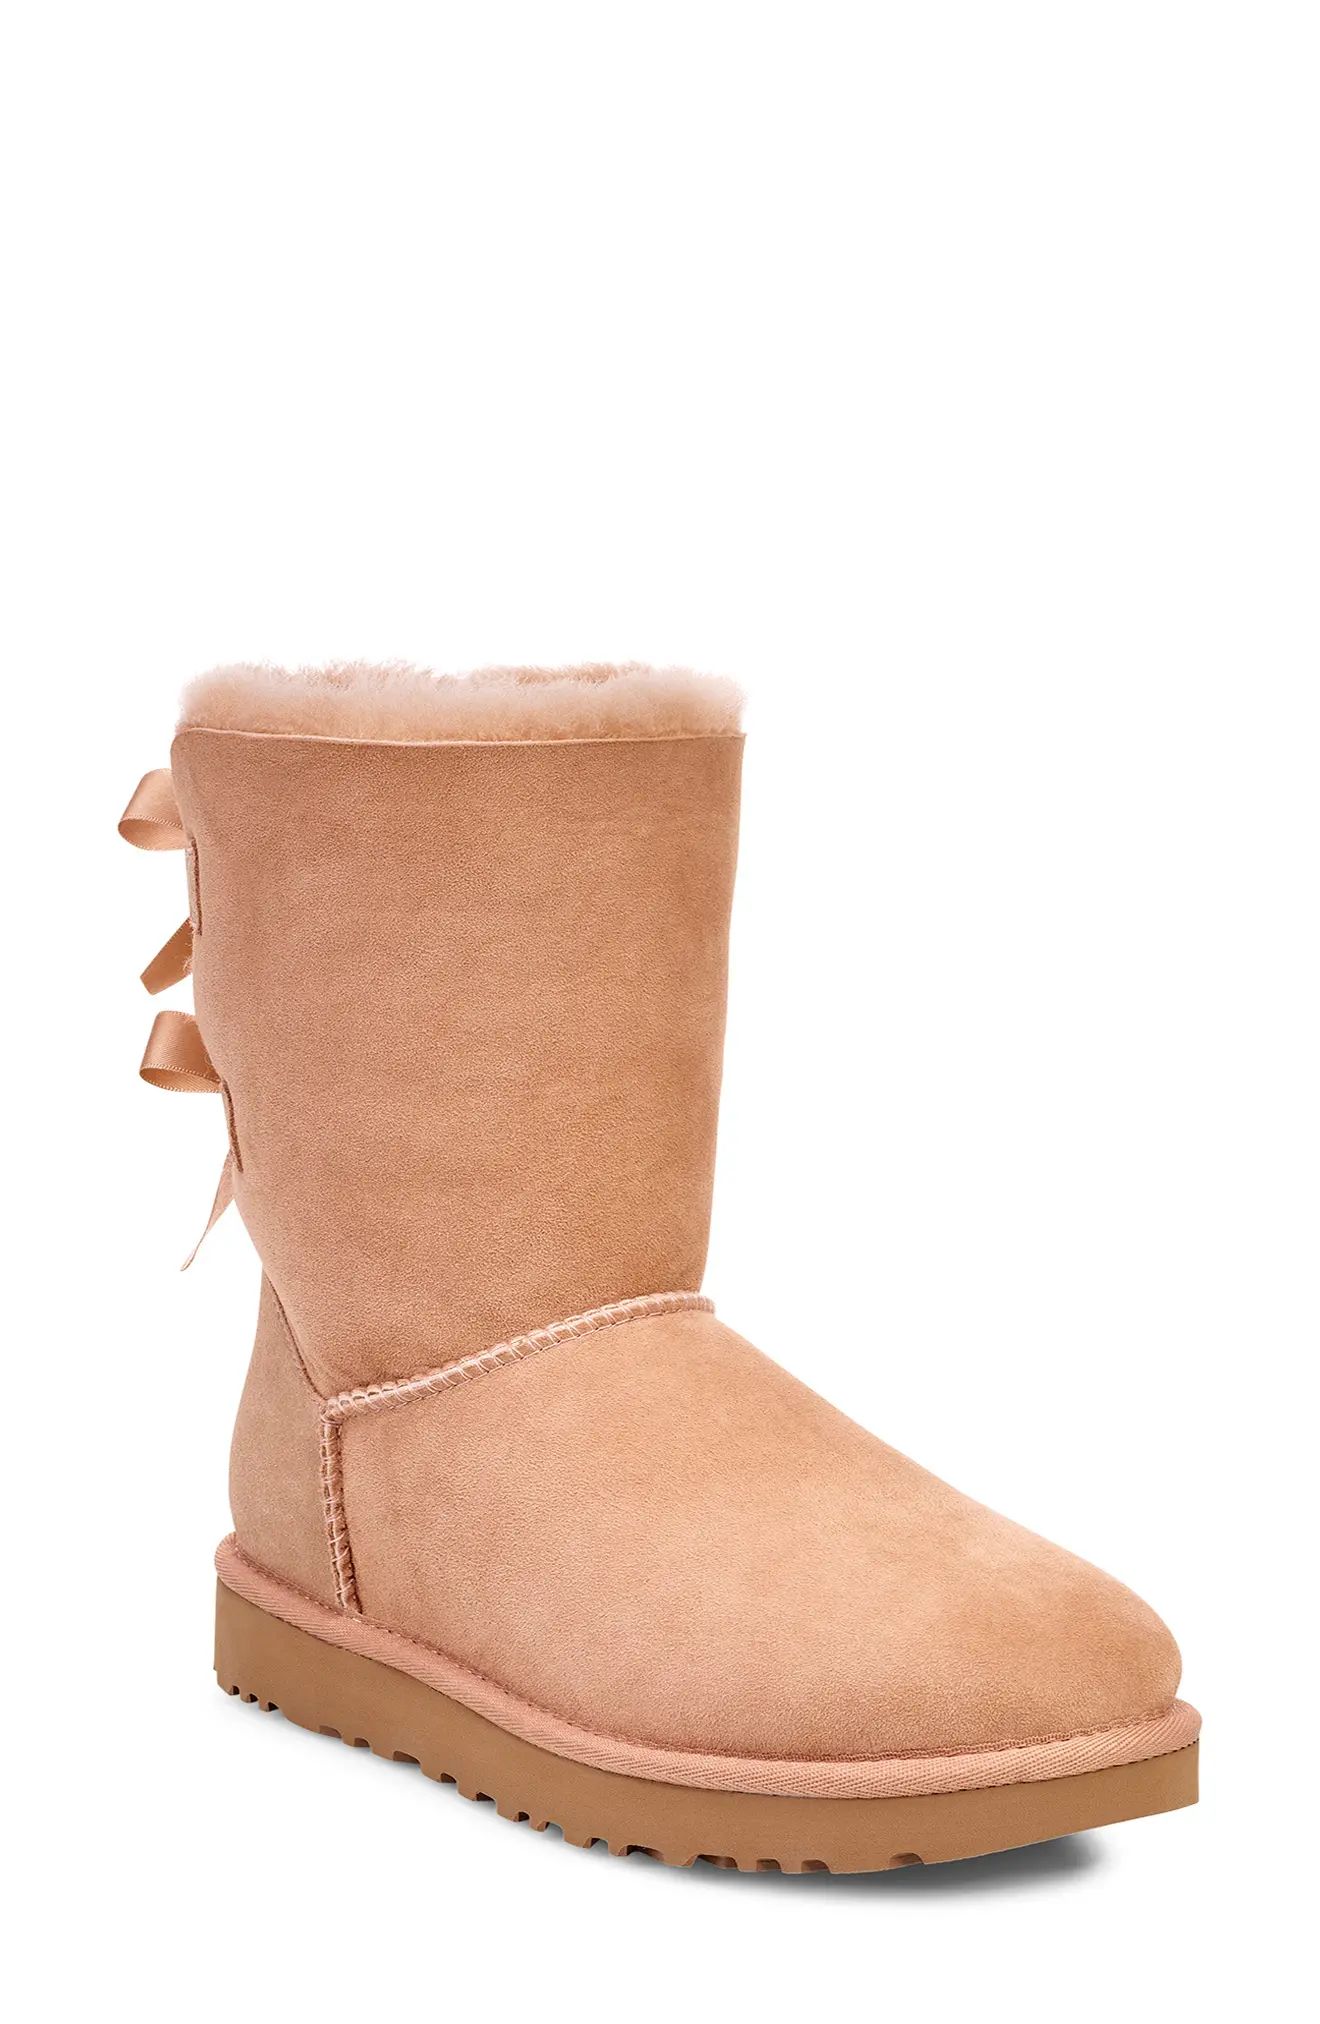 Women's Ugg Bailey Bow Ii Genuine Shearling Boot, Size 6 M - Pink | Nordstrom